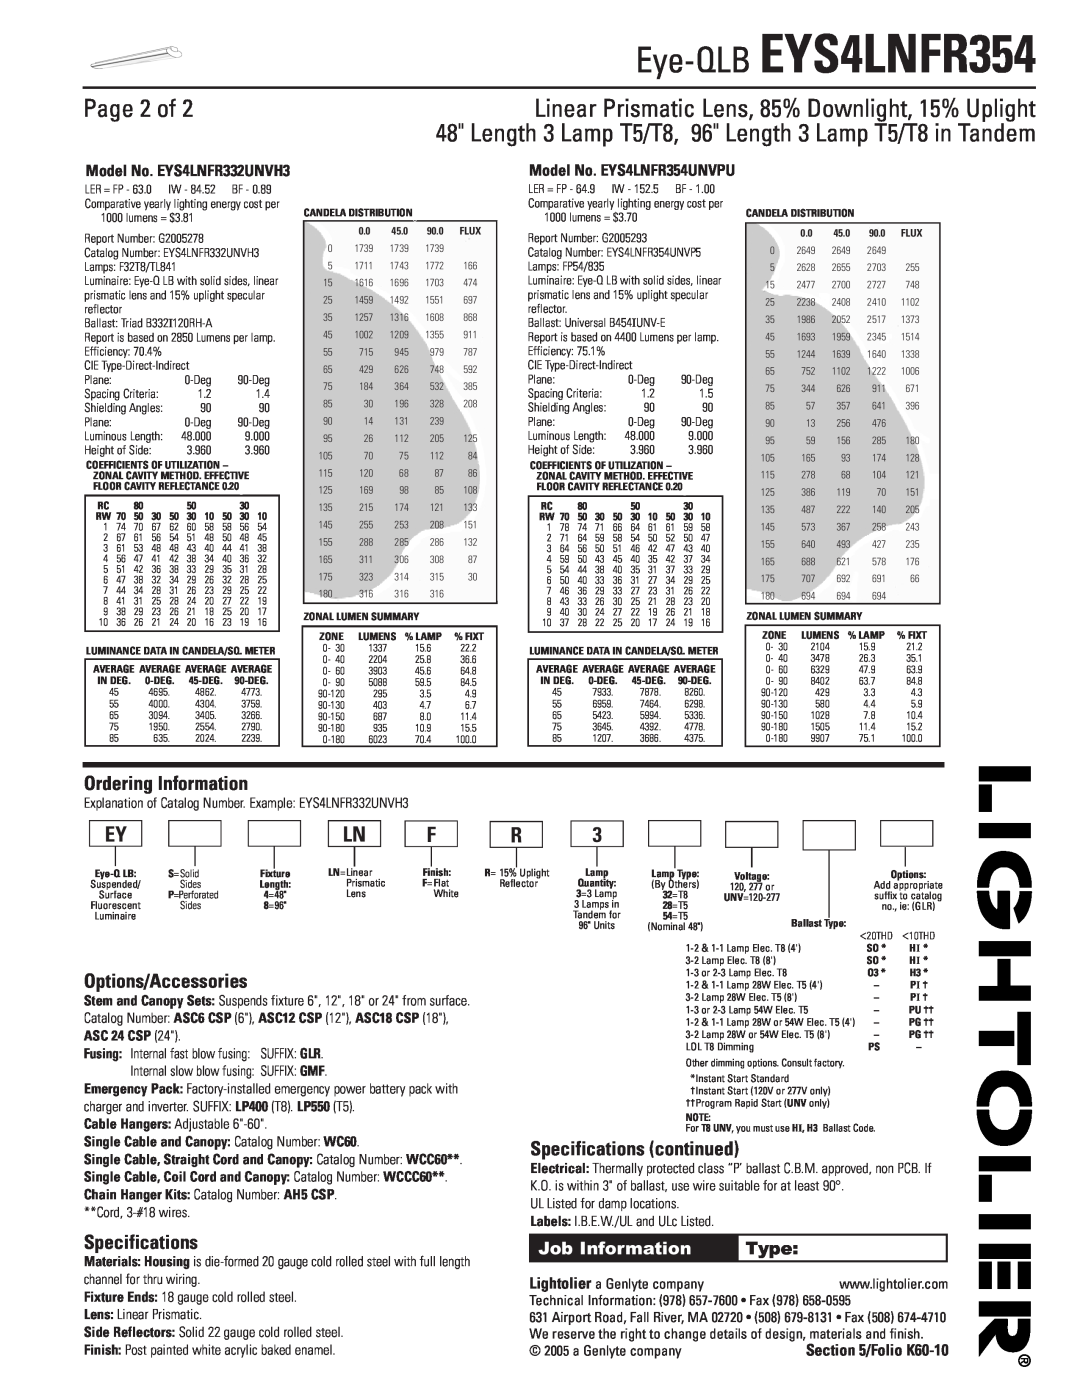 Lightolier EYS4LNFR354 Page 2 of, Ordering Information, Options/Accessories, Specifications continued, Job Information 